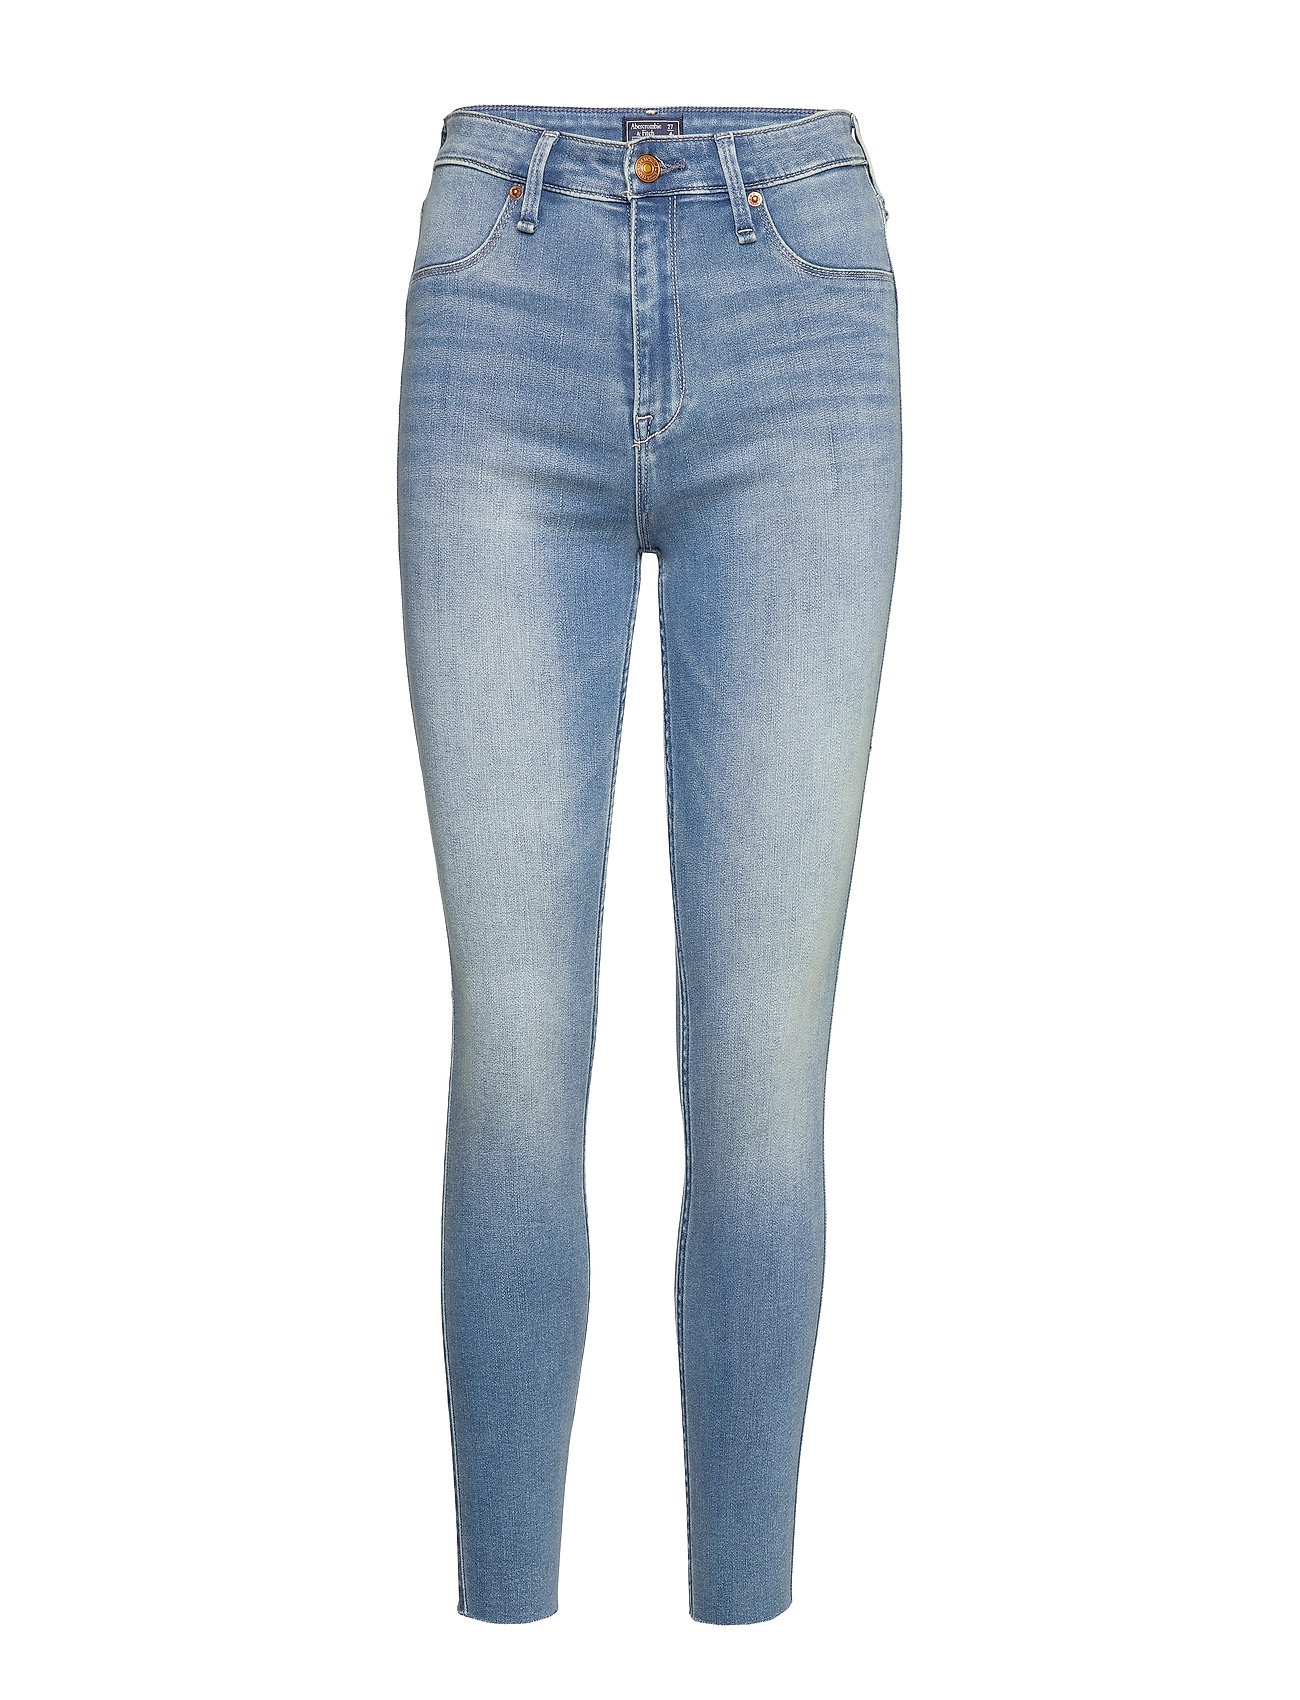 abercrombie and fitch jean leggings